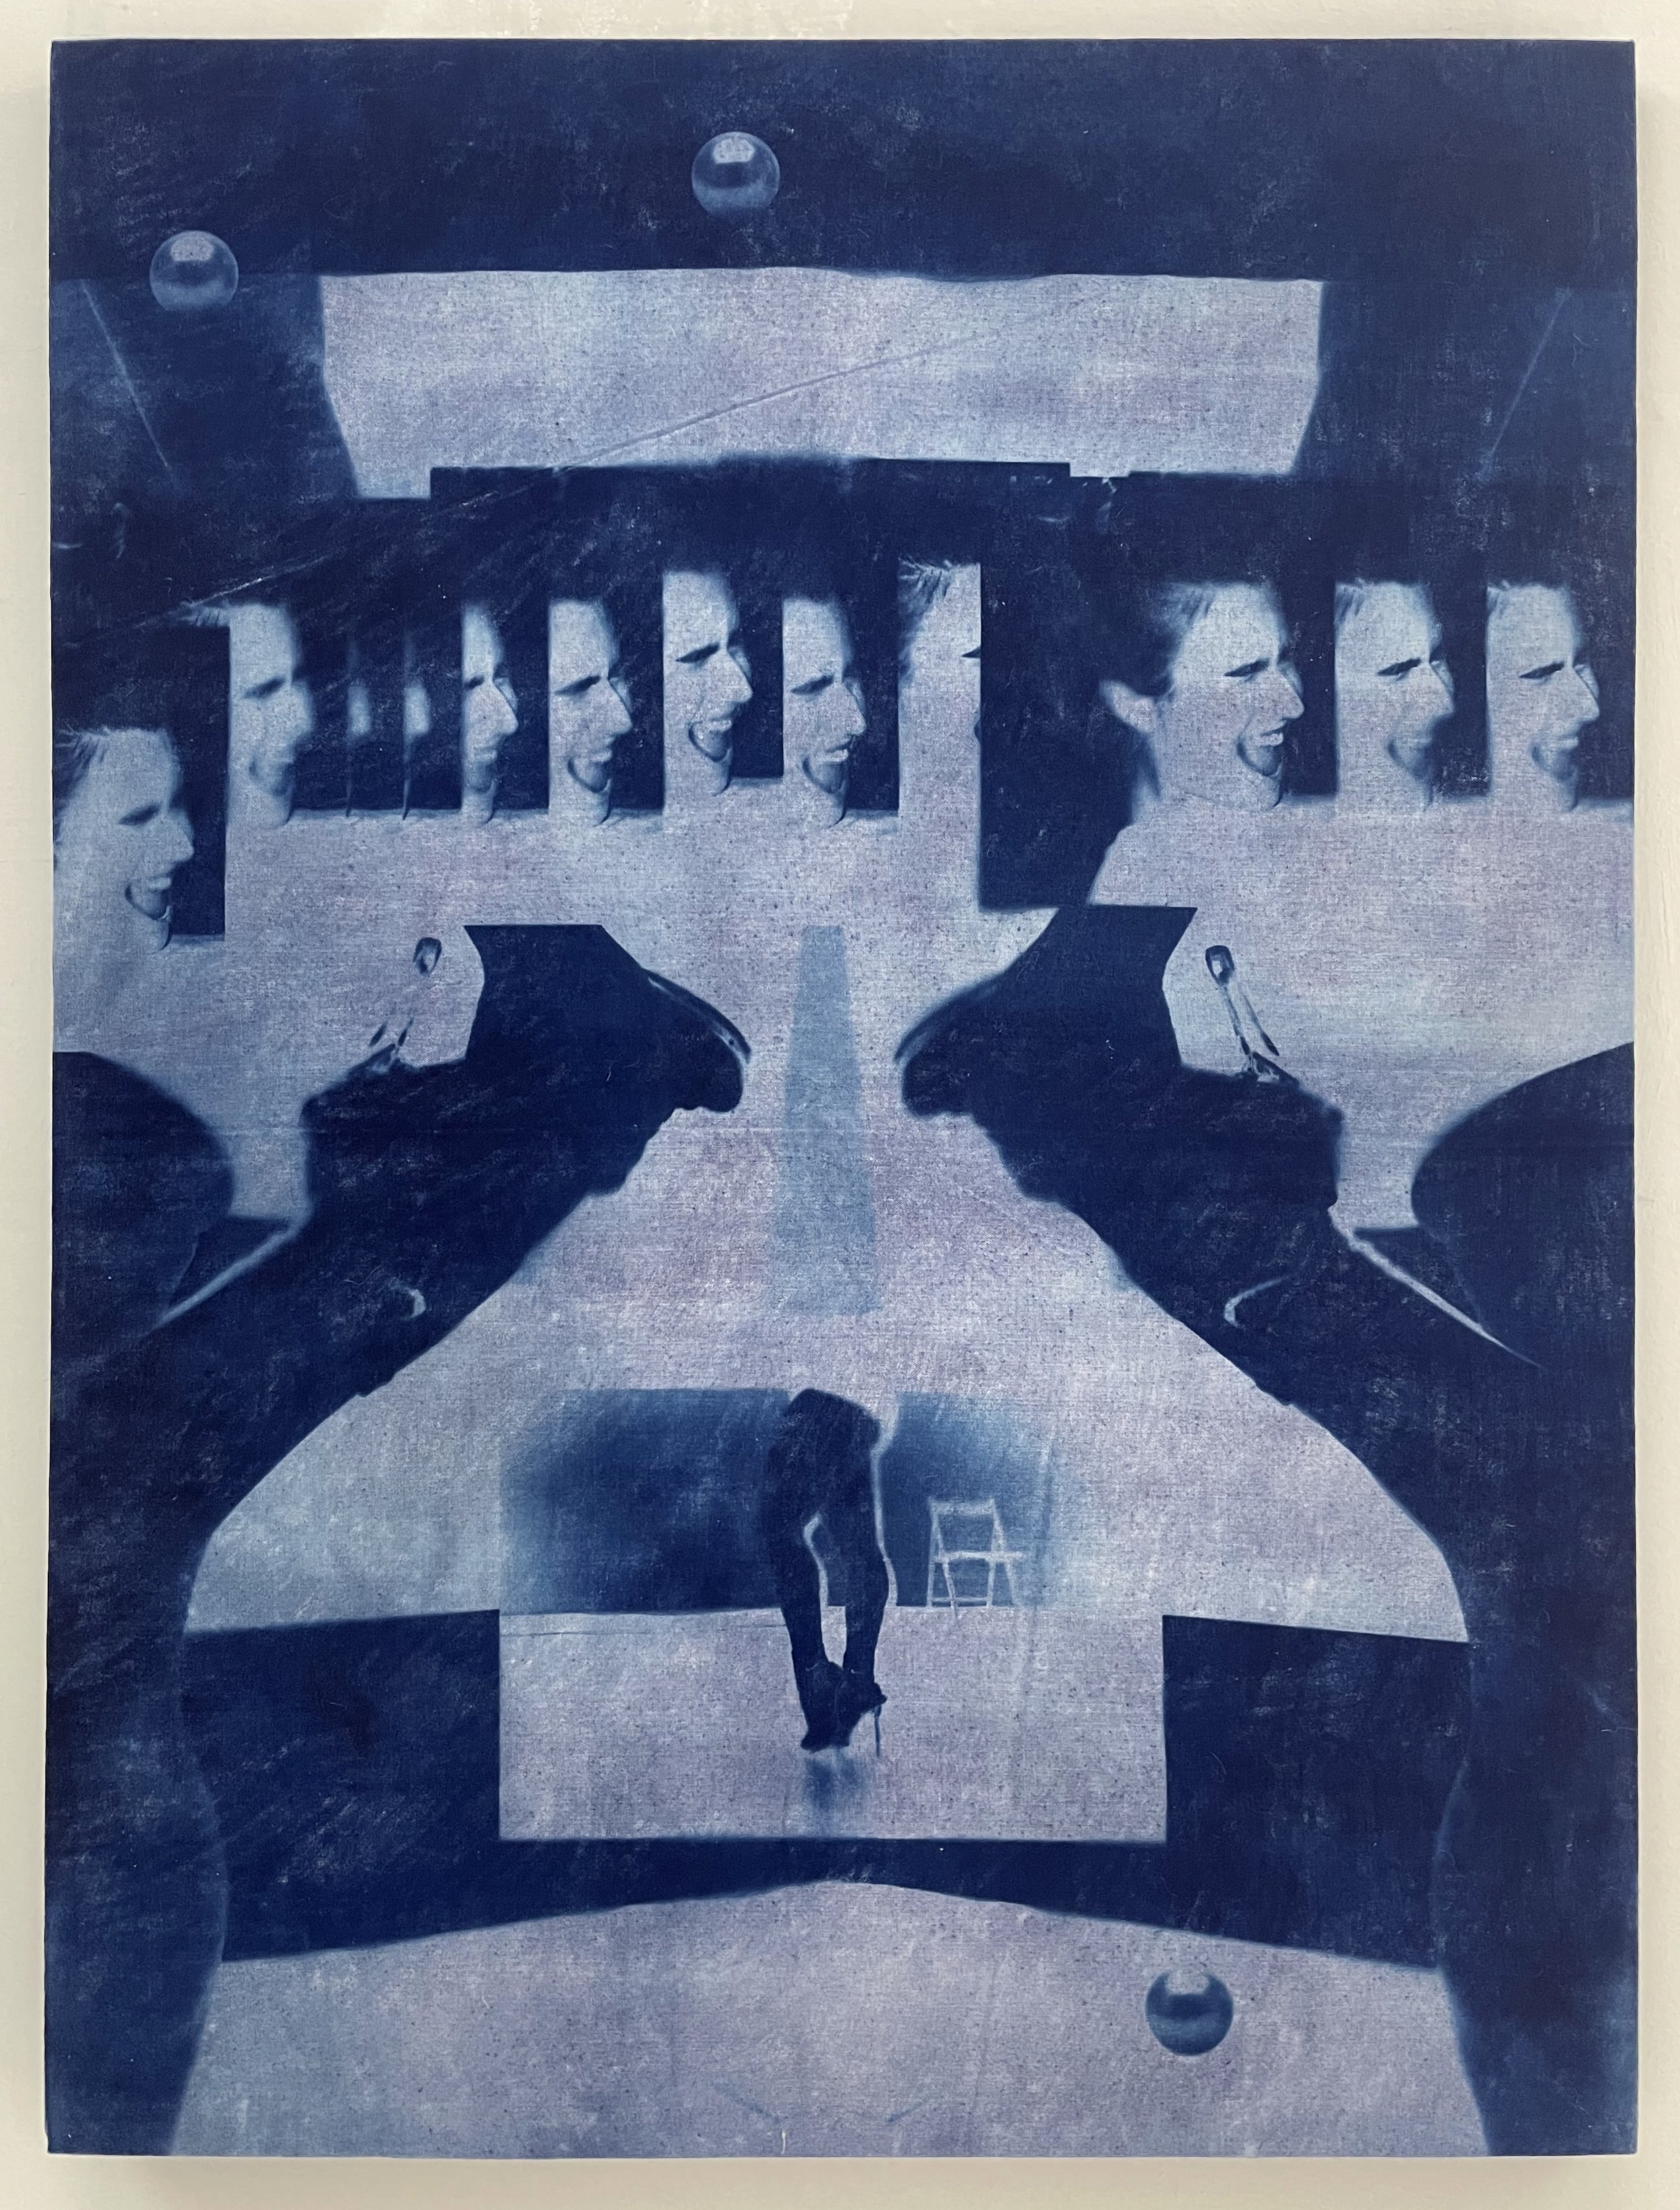  cyanotype on raw stretched canvas, 36” x 48” 